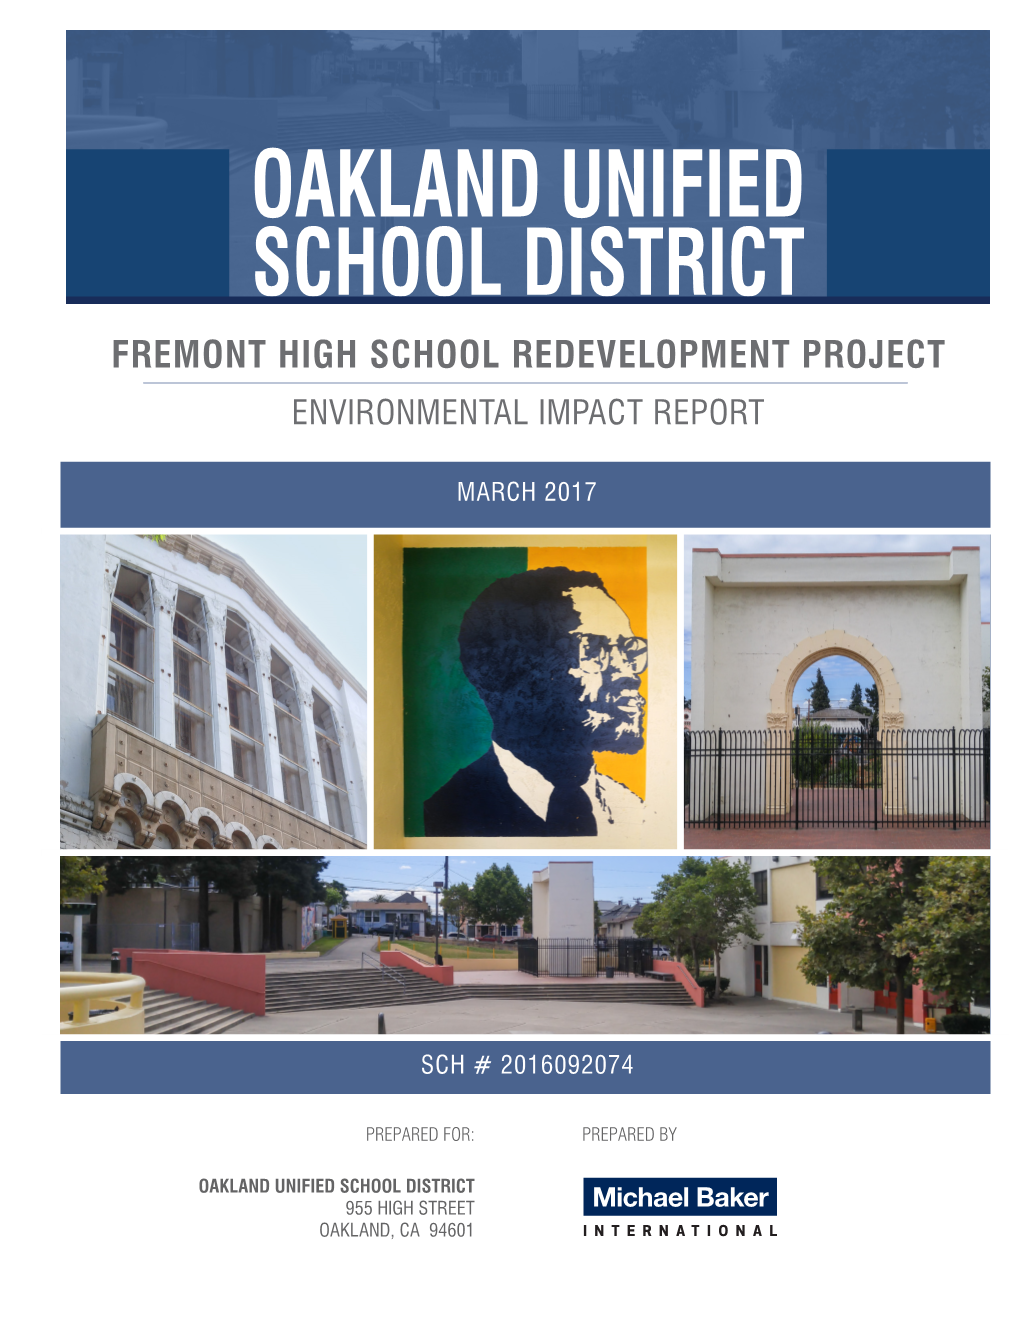 Fremont High School Redevelopment Project EIR Cover